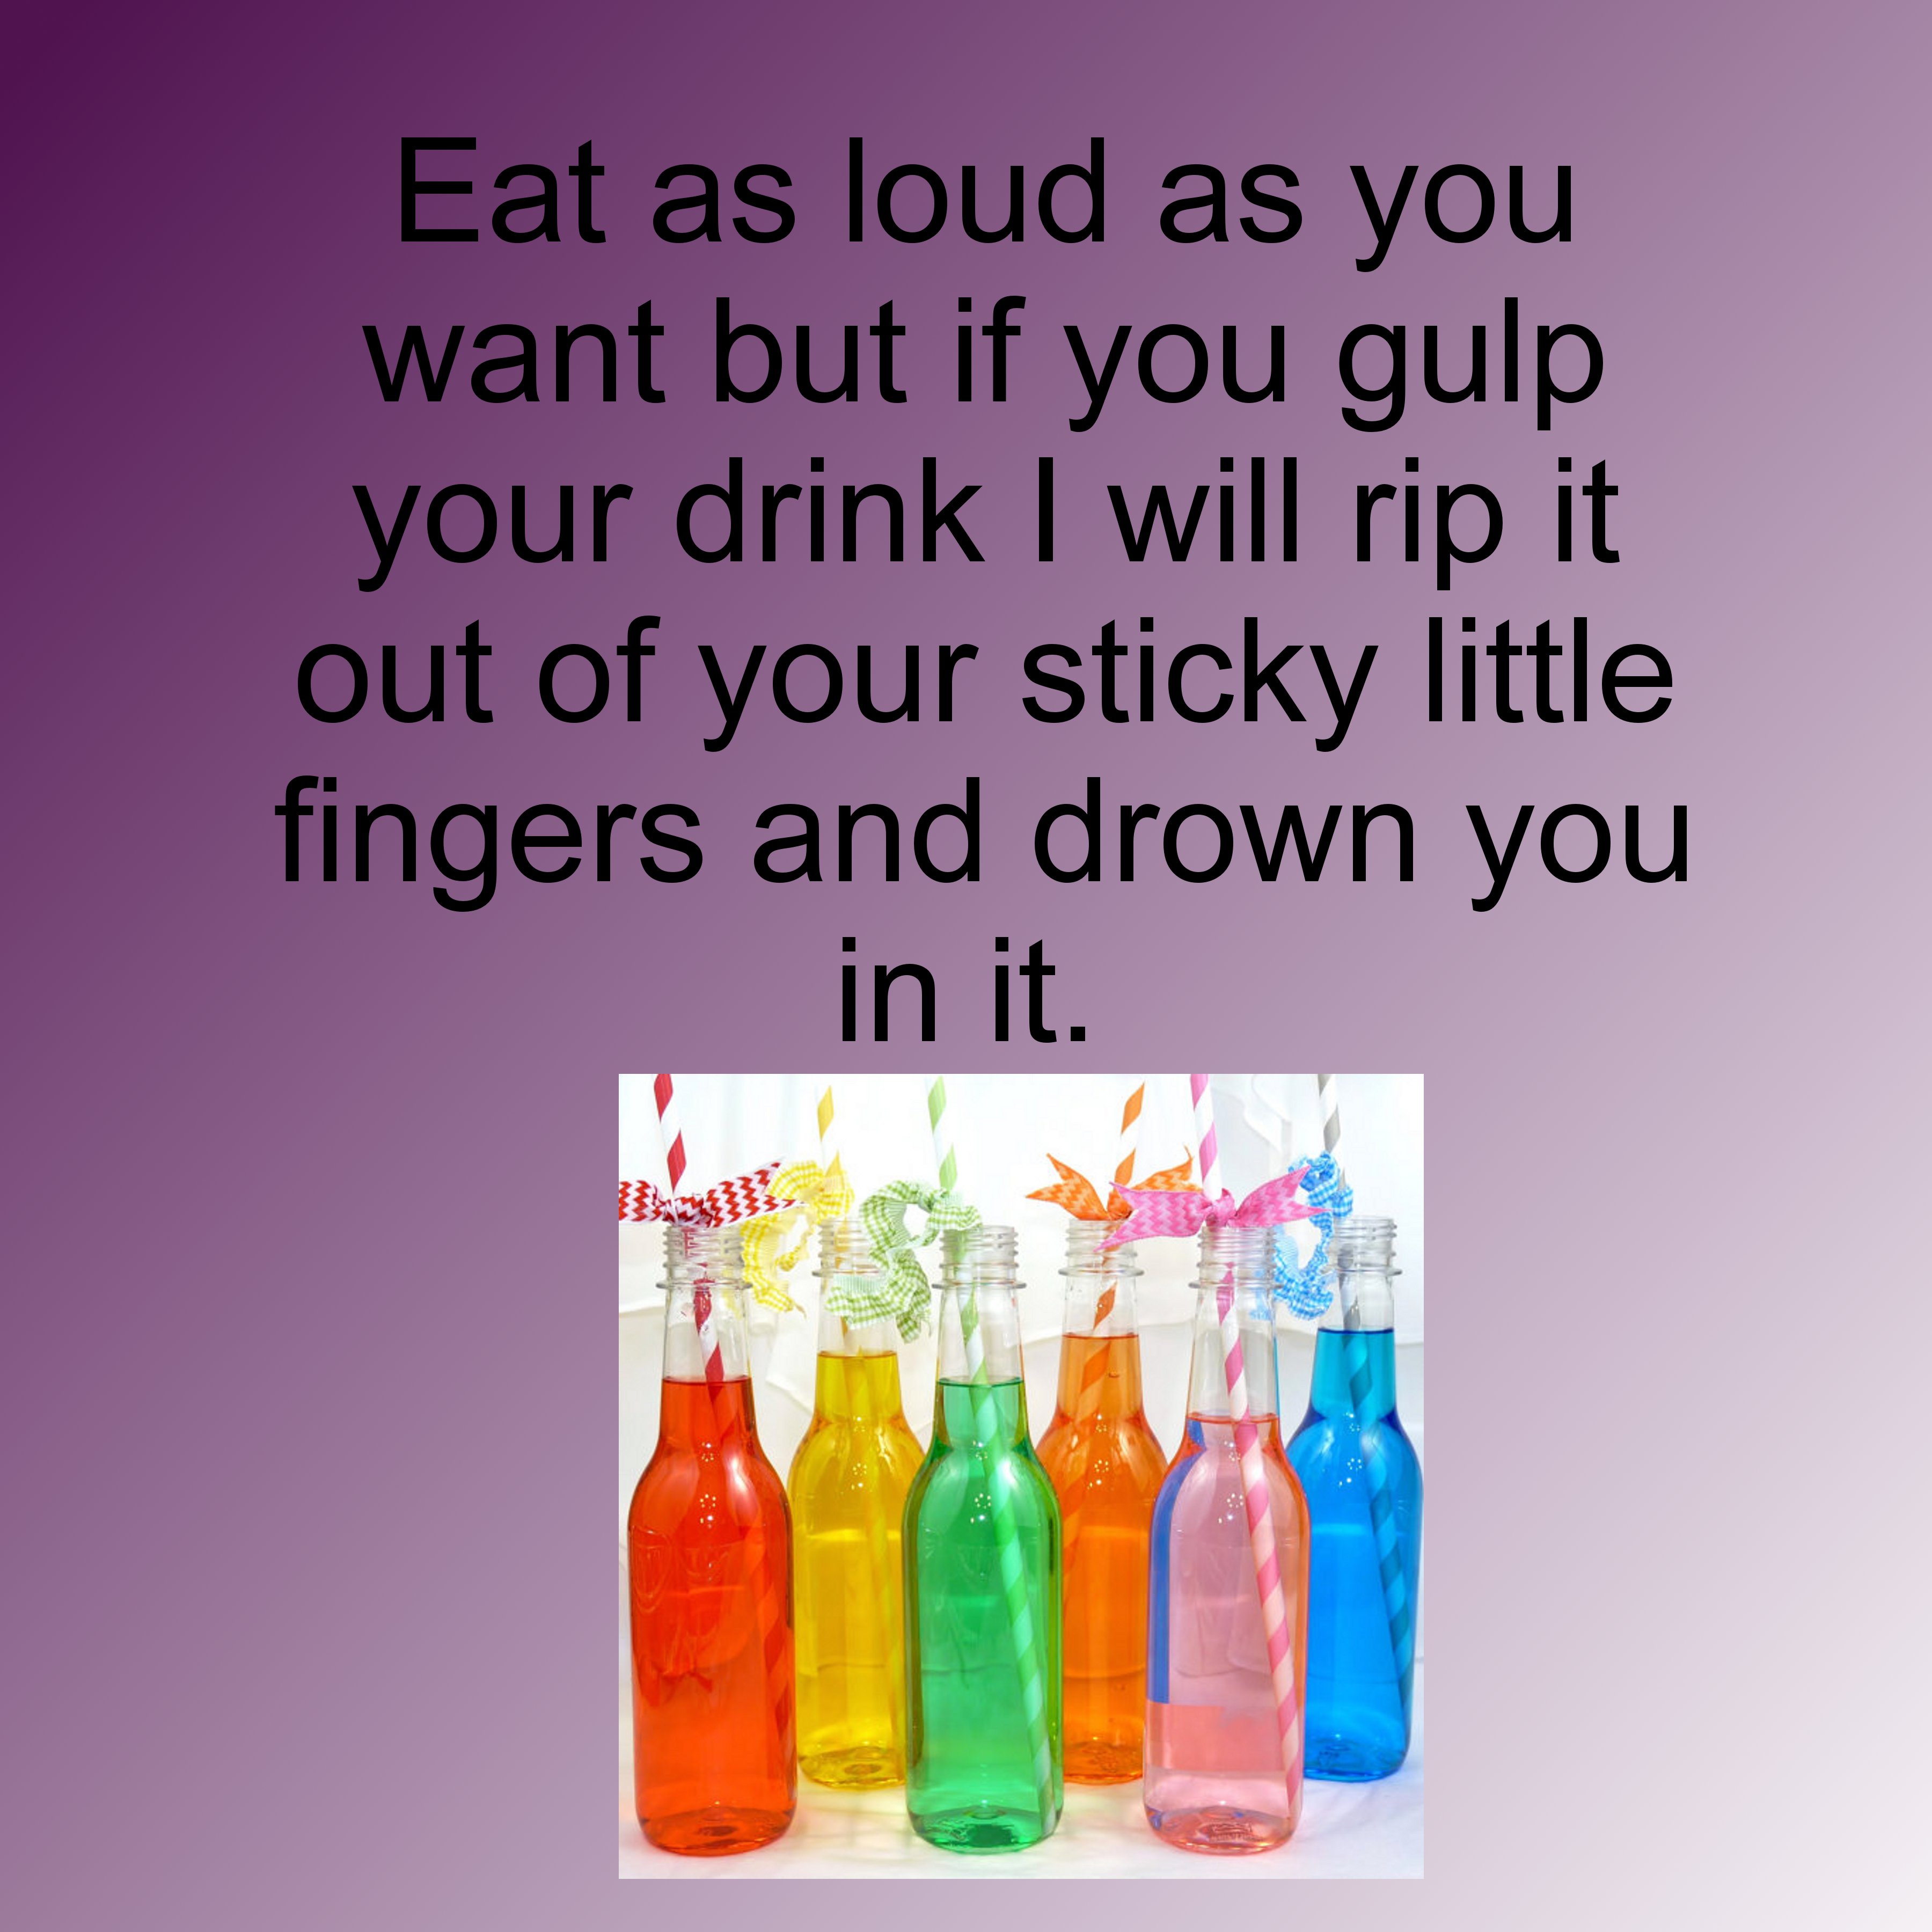 glass bottle - Eat as loud as you want but if you gulp your drink I will rip it out of your sticky little fingers and drown you in it.